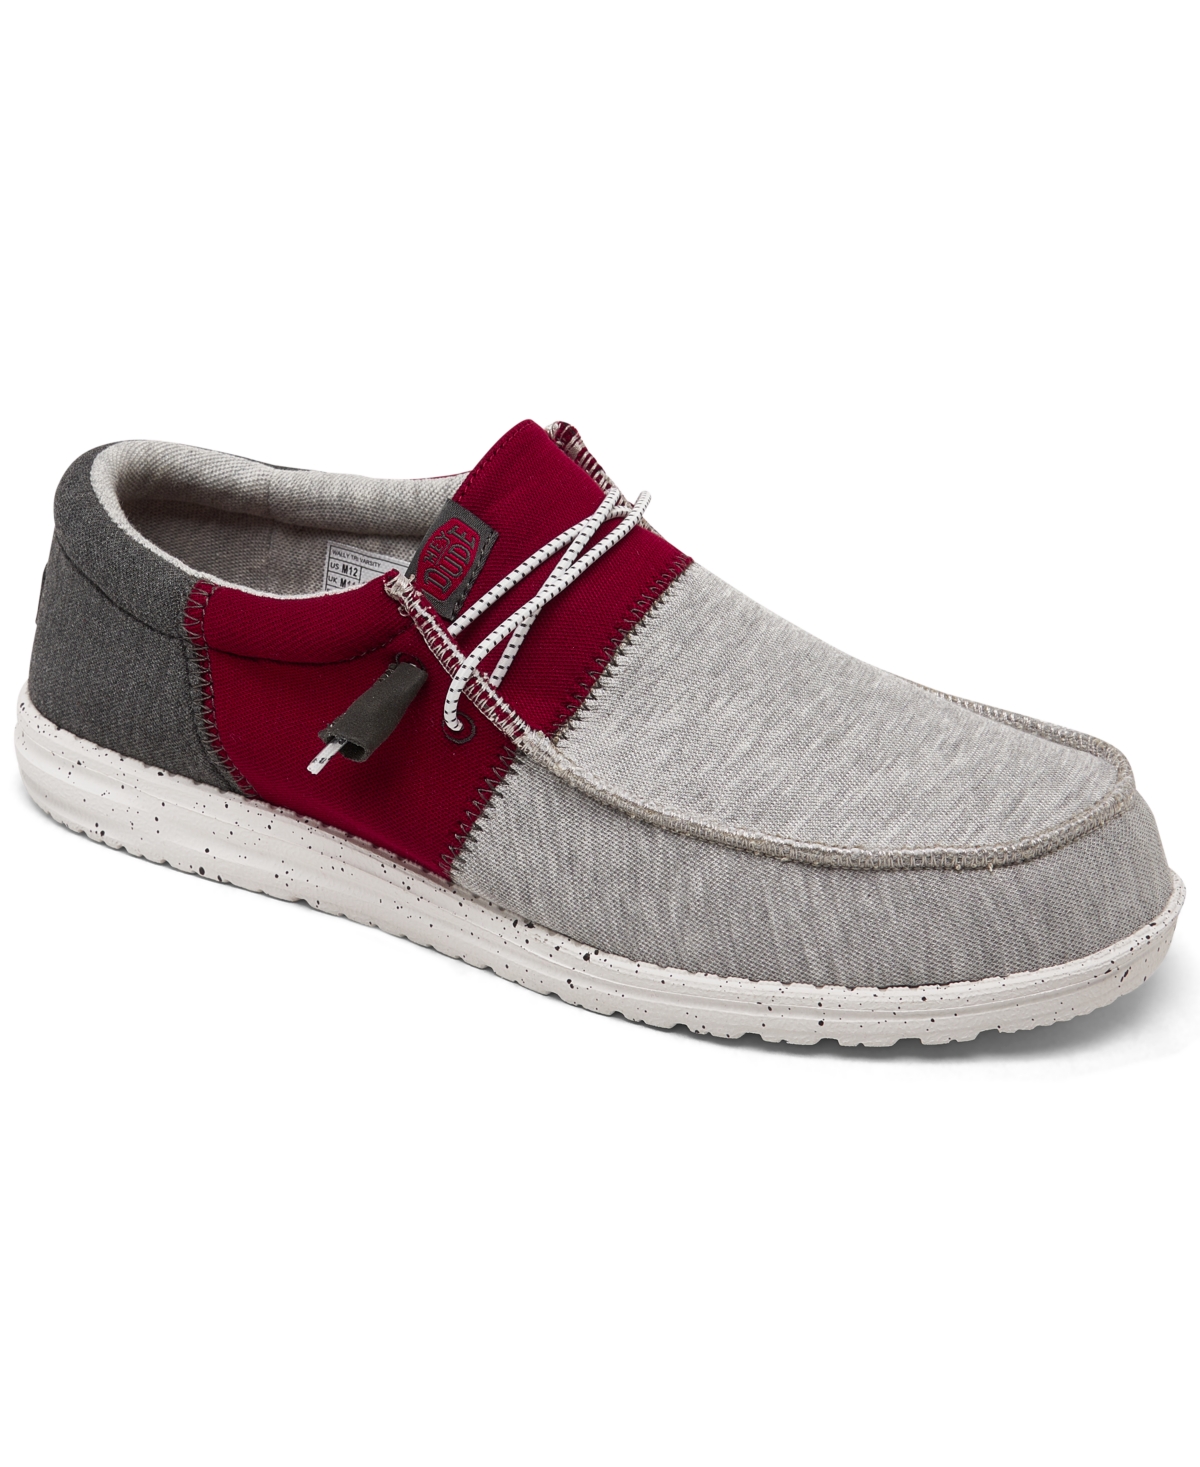 Shop Hey Dude Men's Wally Tri Varsity Casual Moccasin Sneakers From Finish Line In Crimson